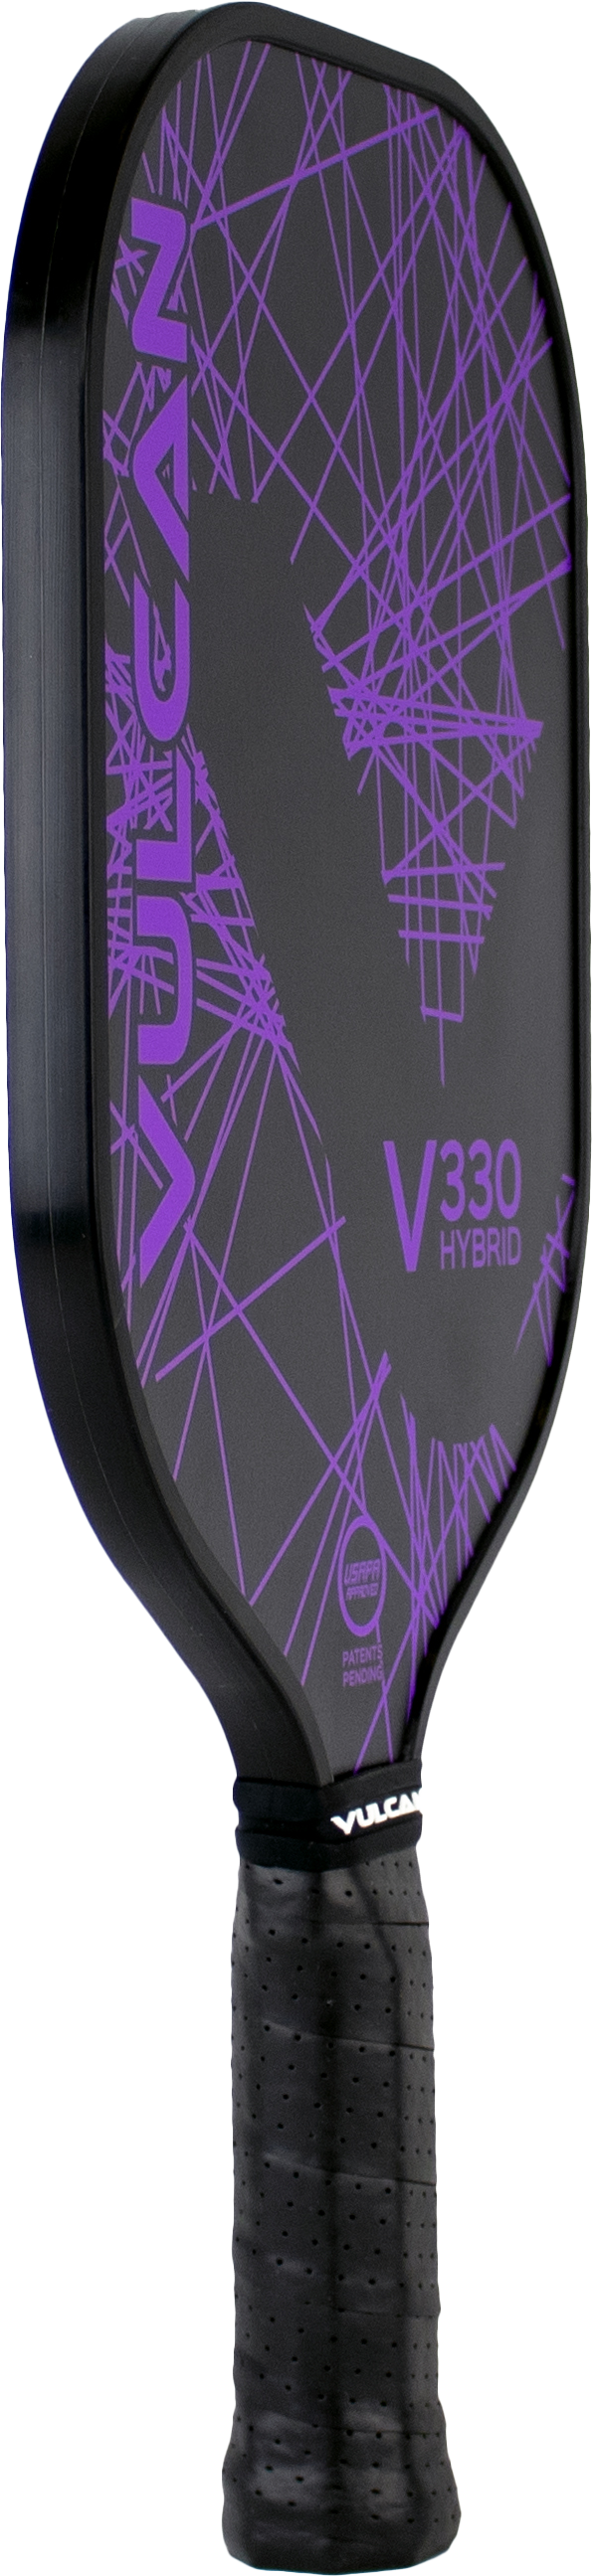 A purple and black Vulcan V330 Pickleball Paddle with the word Vulcan on it.